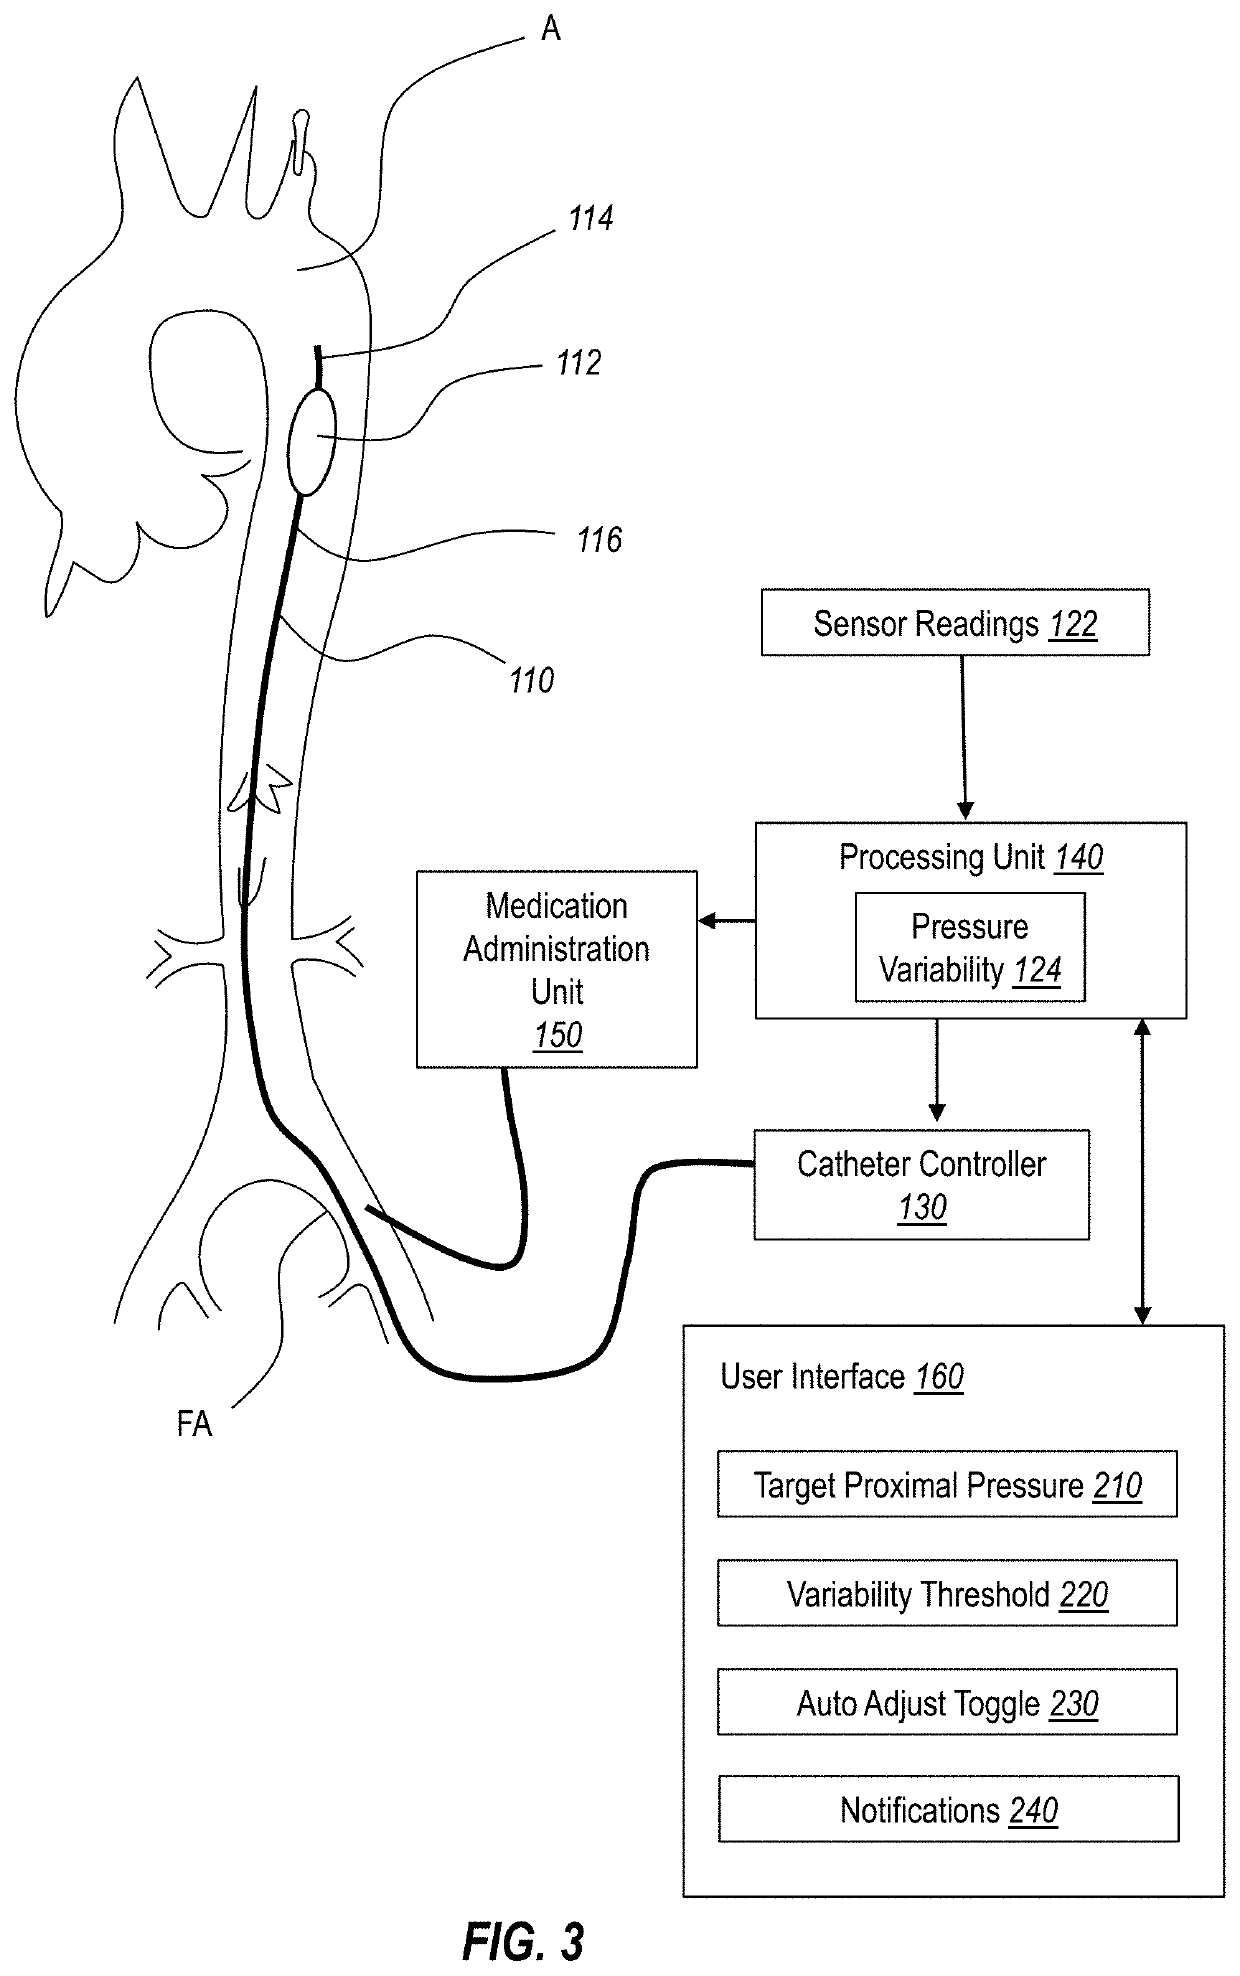 Blood pressure regulation system for the treatment of neurologic injuries